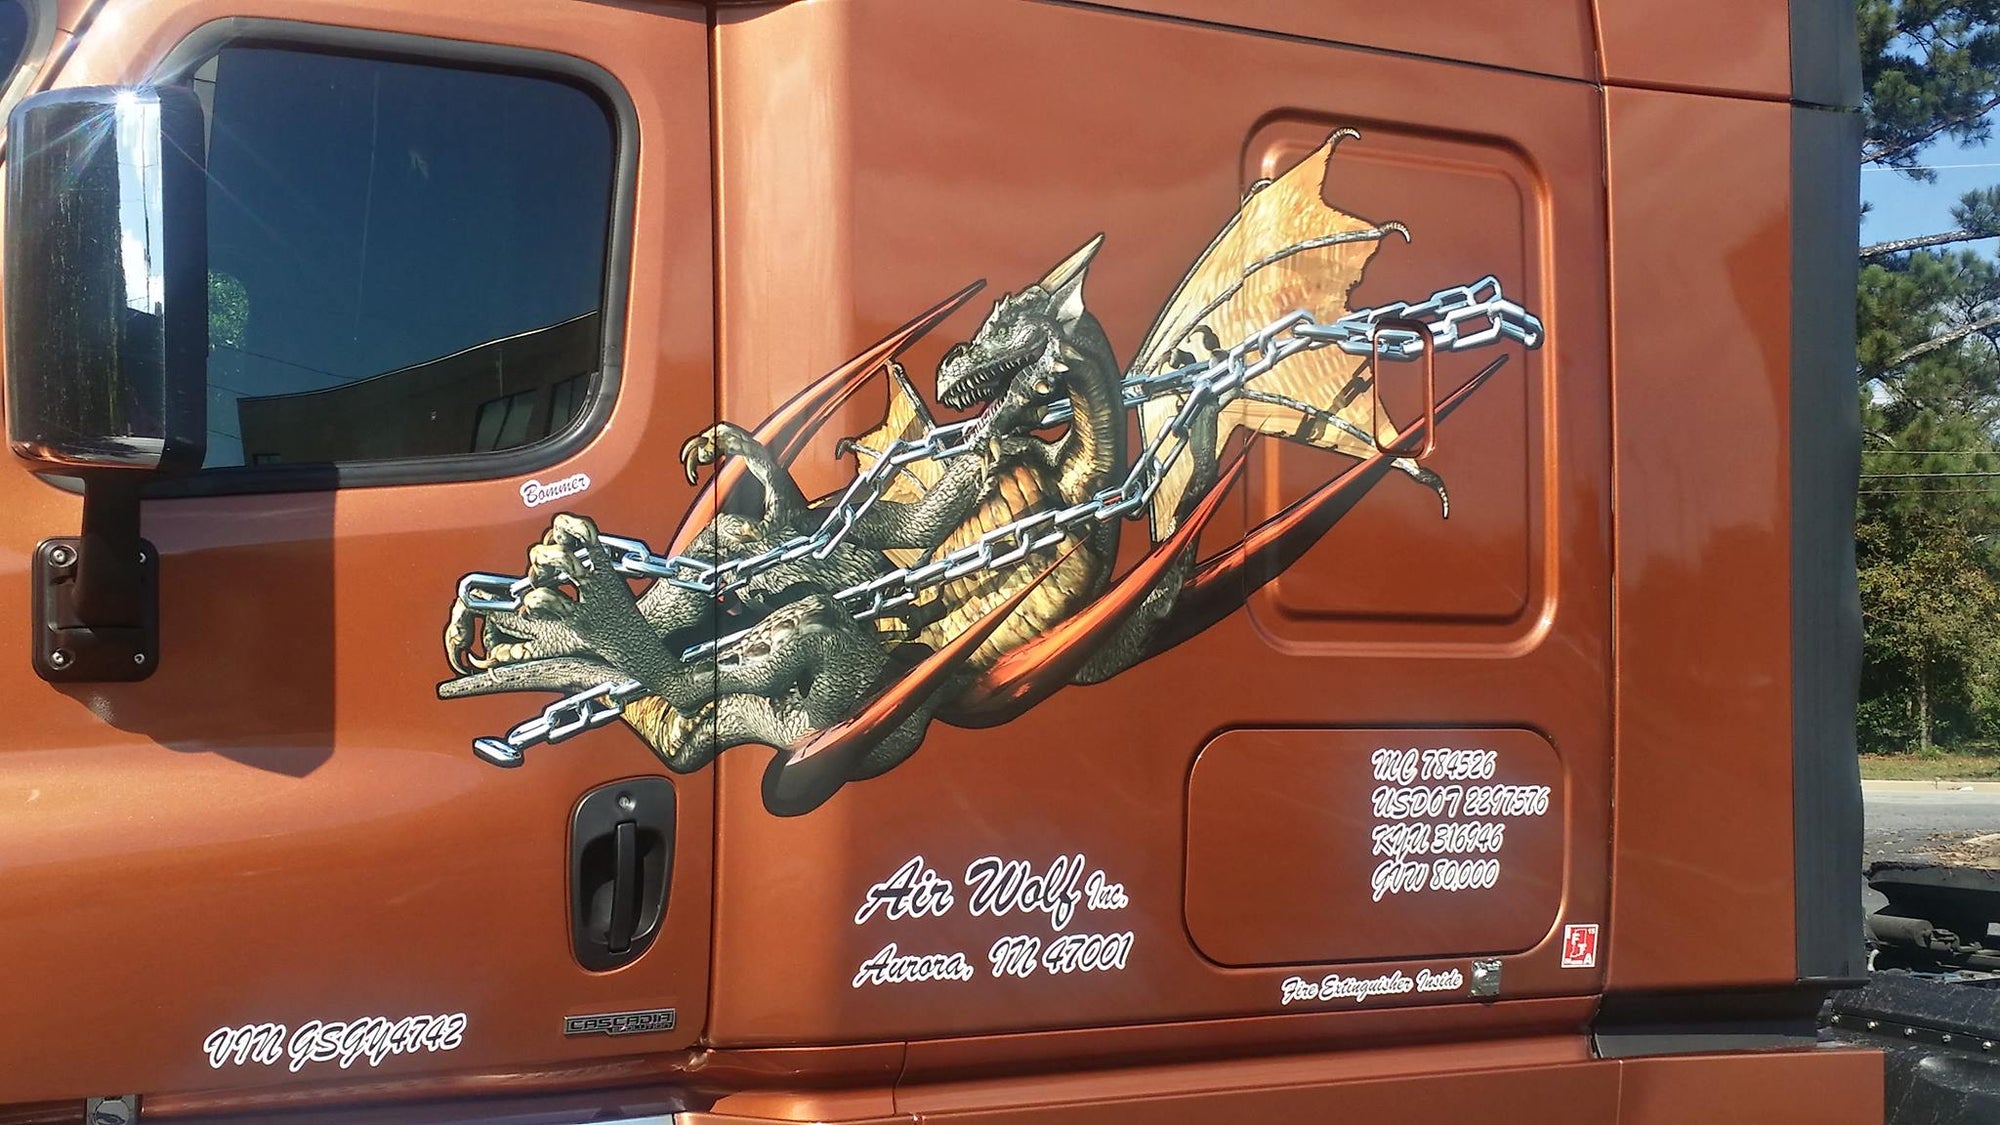 Chained Dragon Decal on a Semi Truck